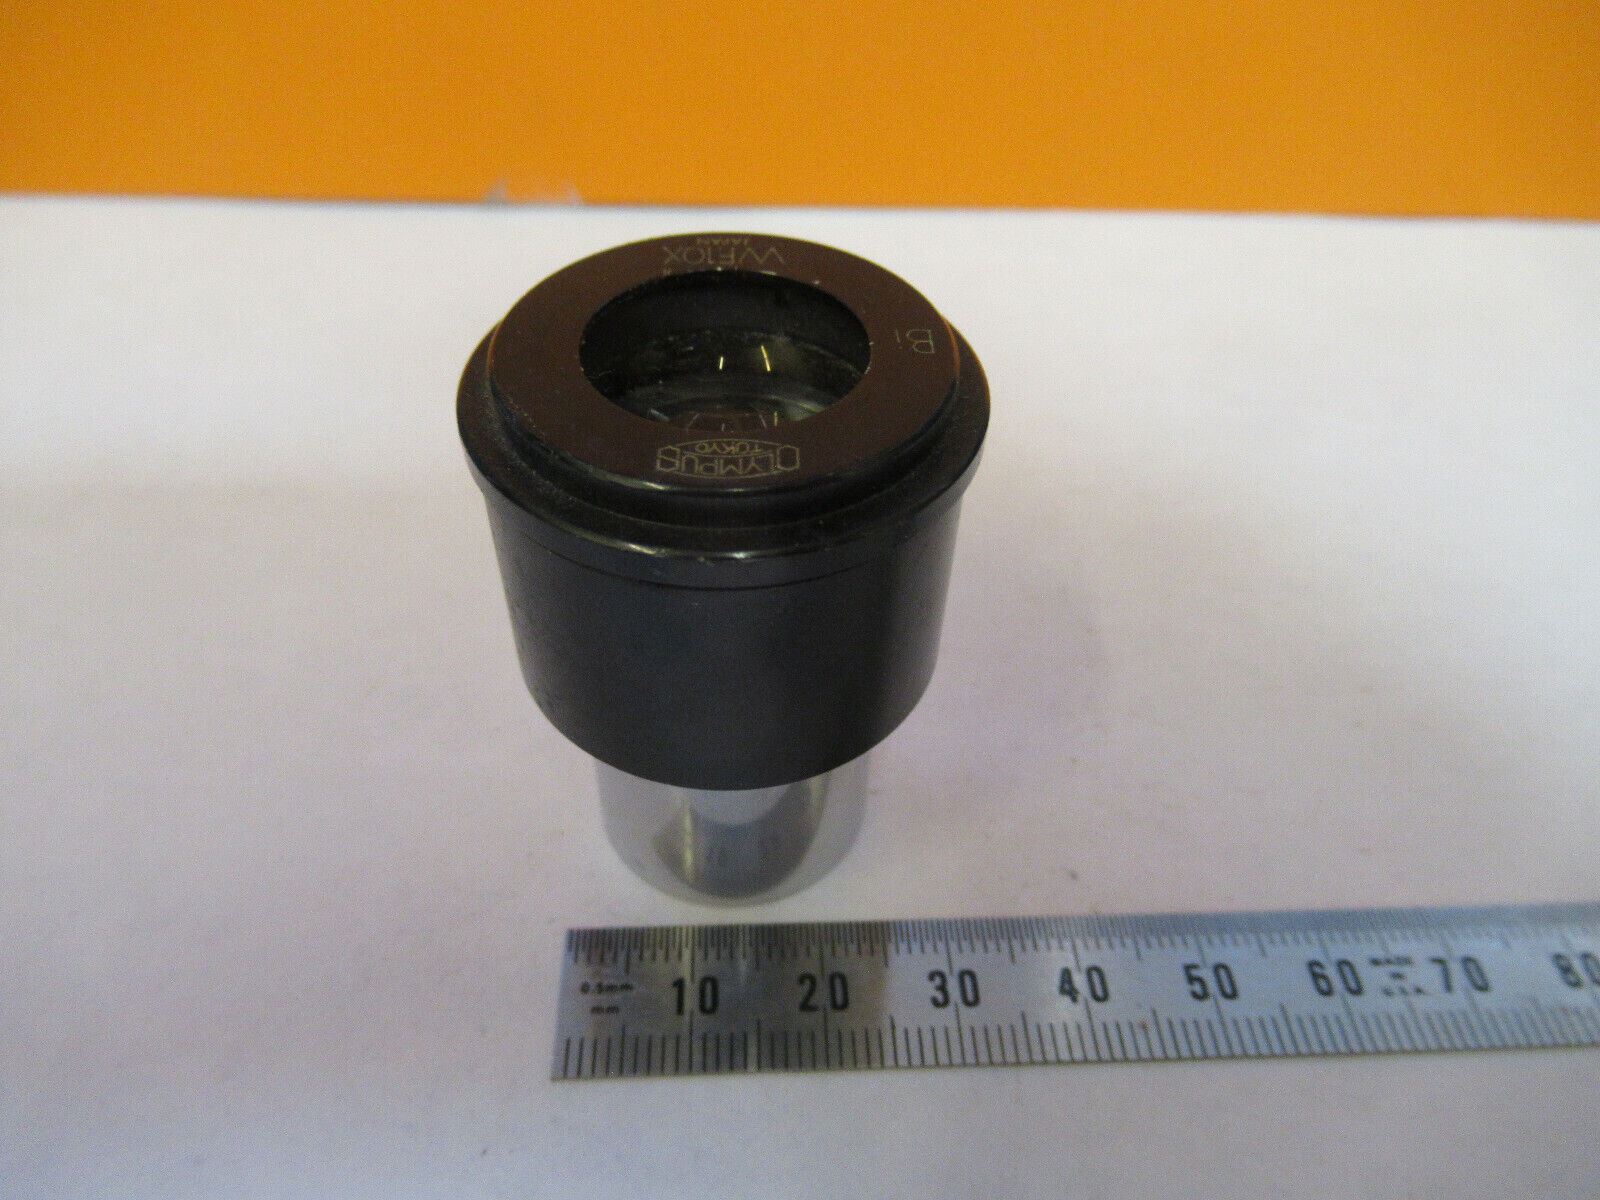 OLYMPUS JAPAN WF10X OFFicial shop Bi EYEPIECE PICTUR Chicago Mall PART MICROSCOPE OCULAR AS